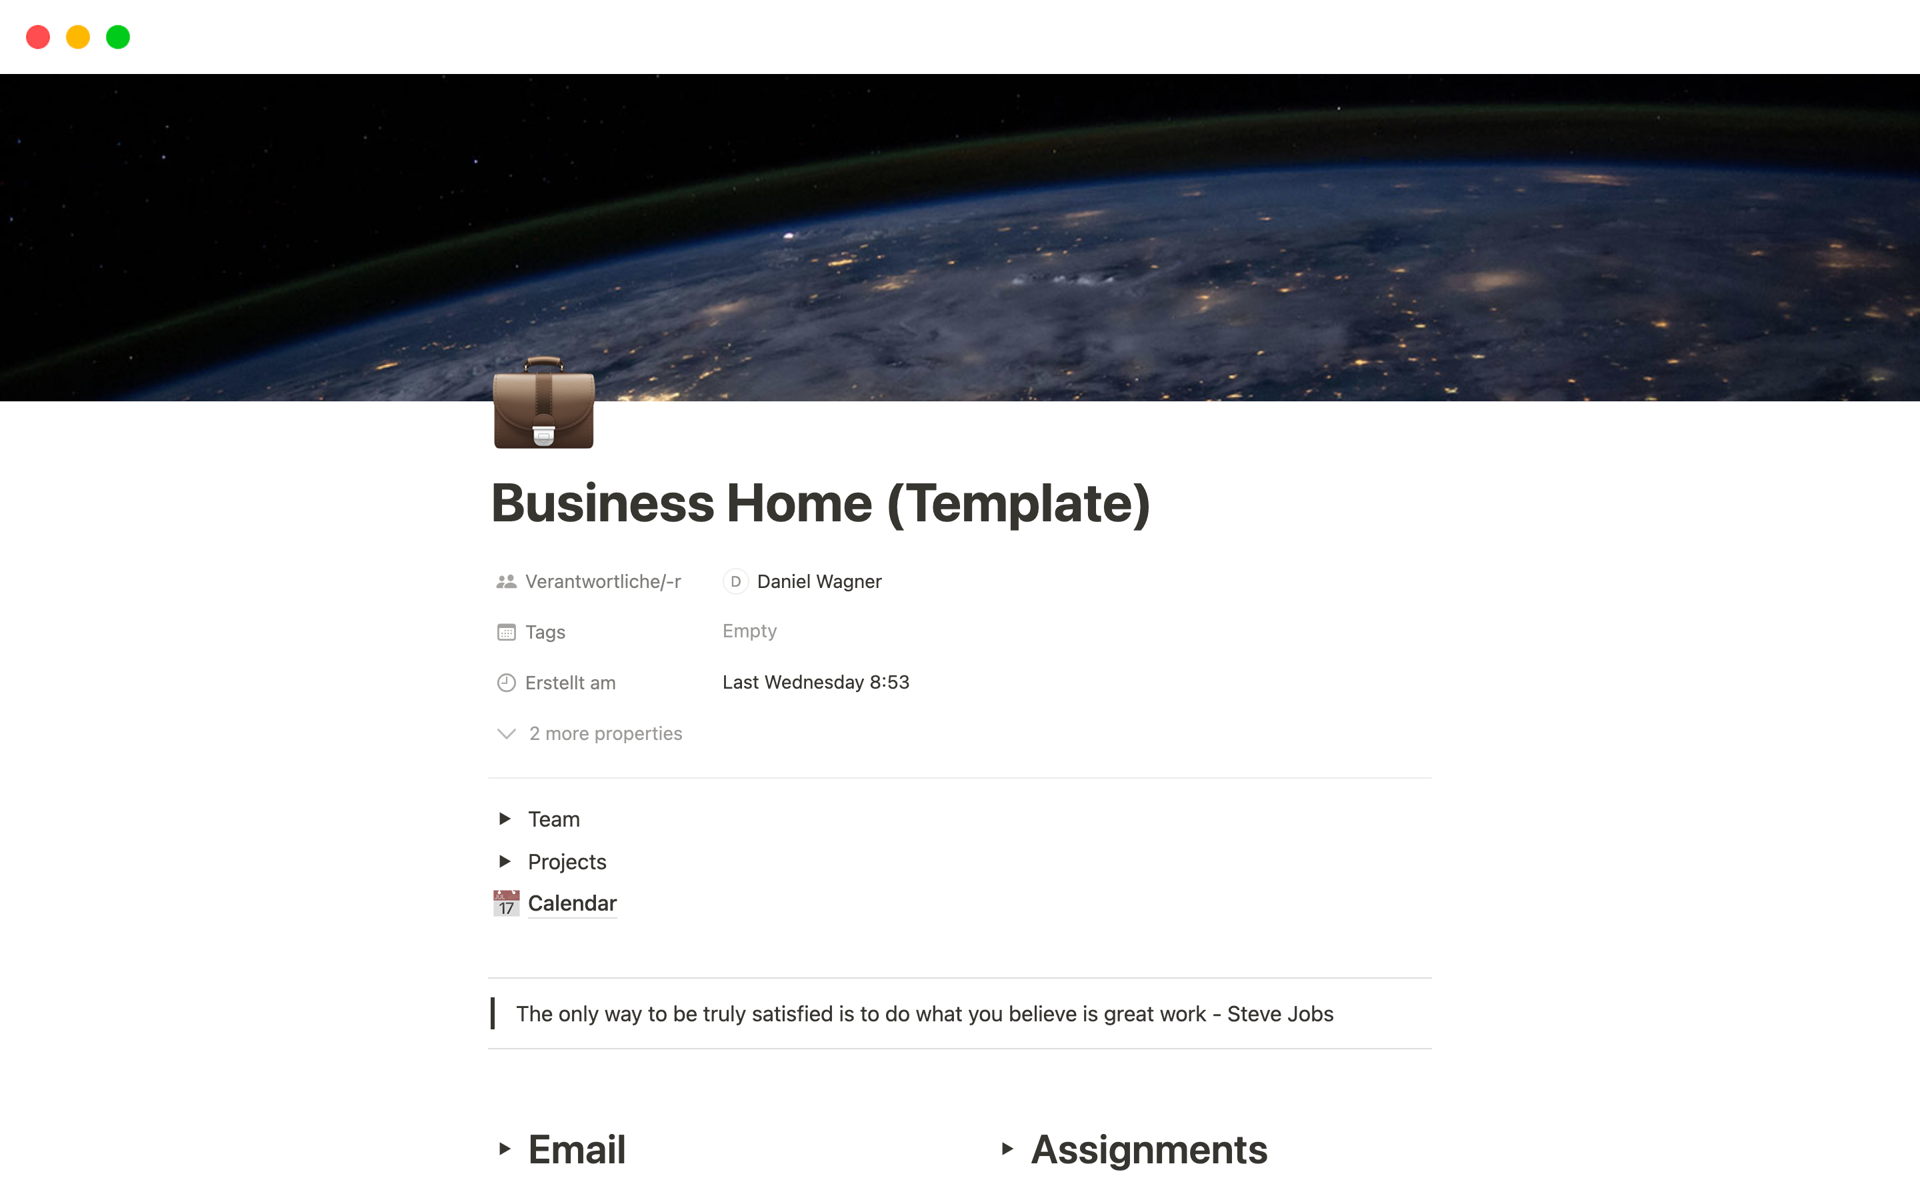 This Template helps small businesses to organize themselves